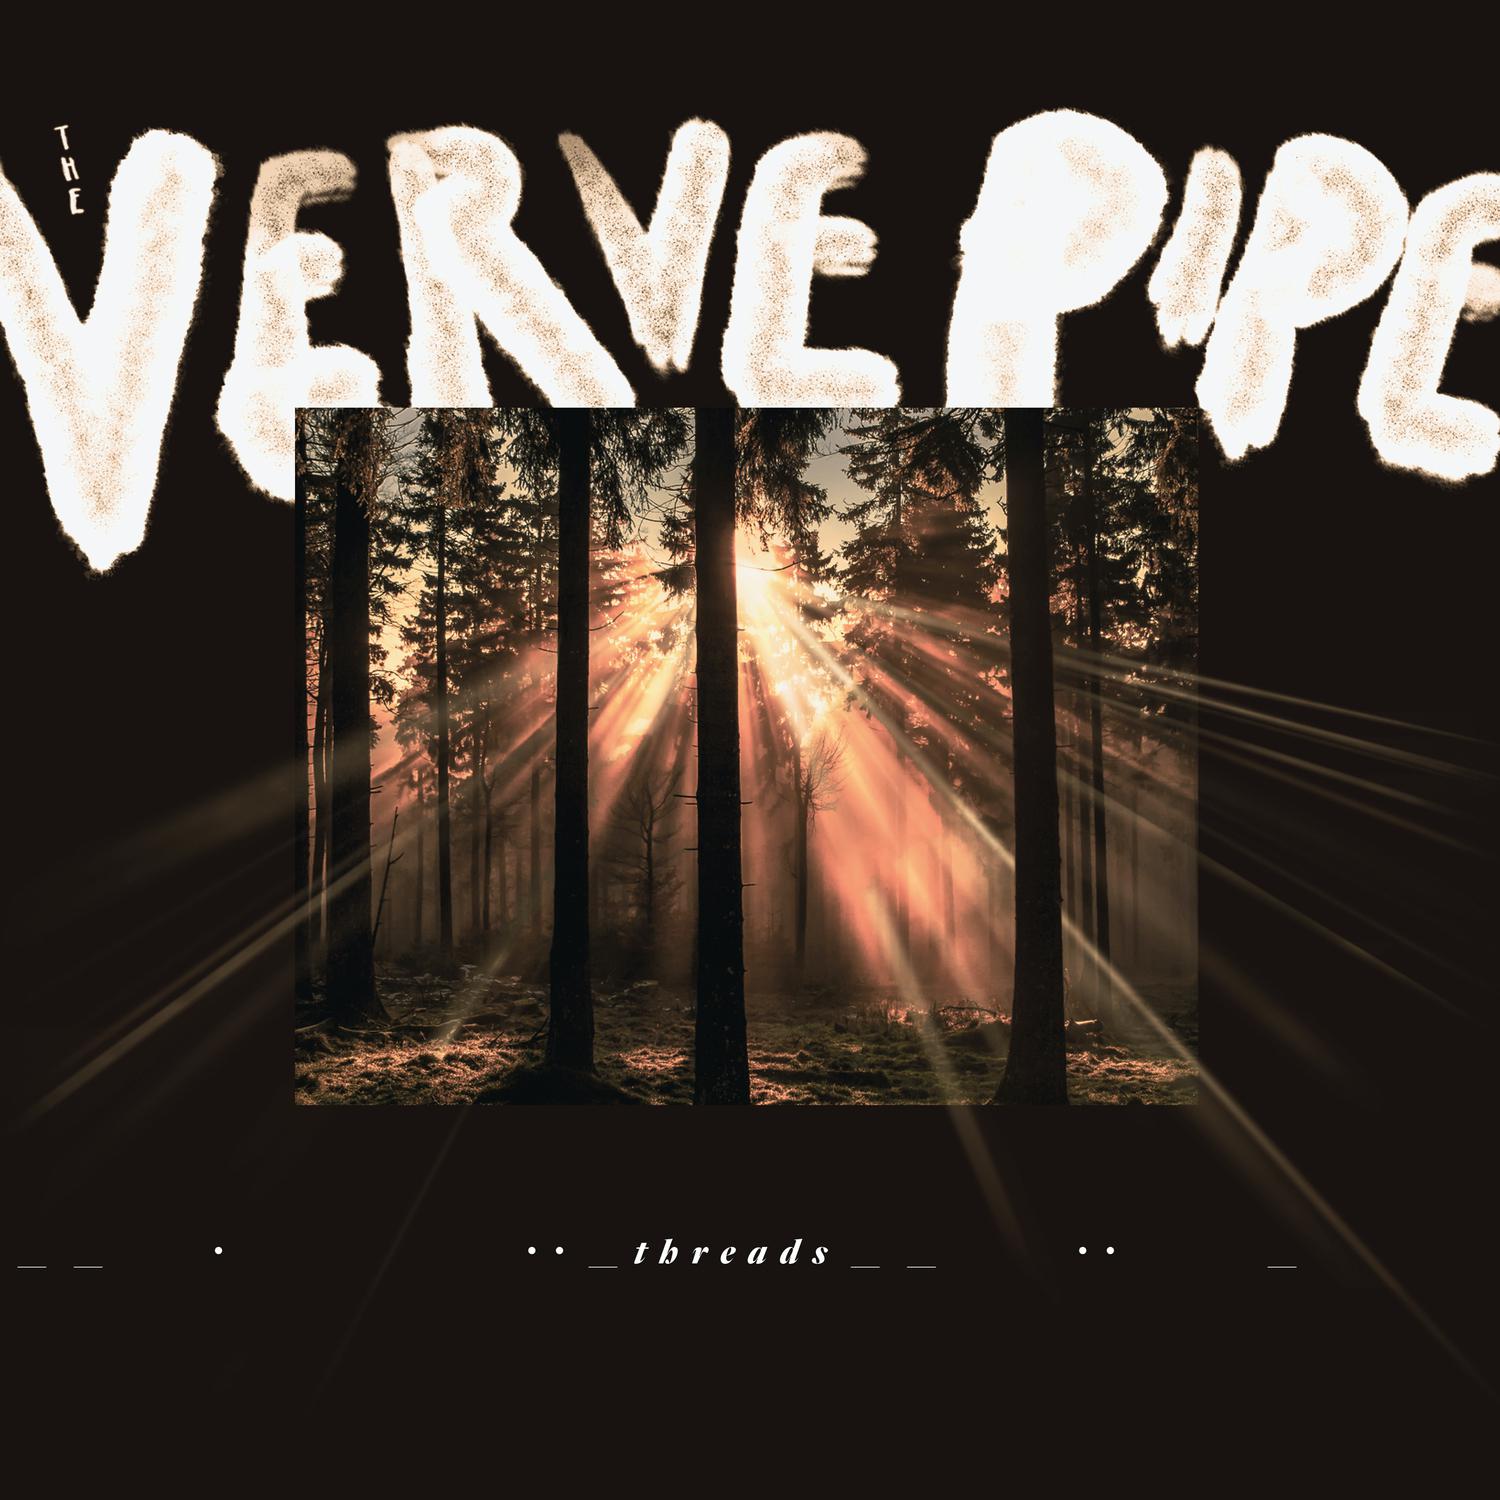 The Verve Pipe - The Witching Hour